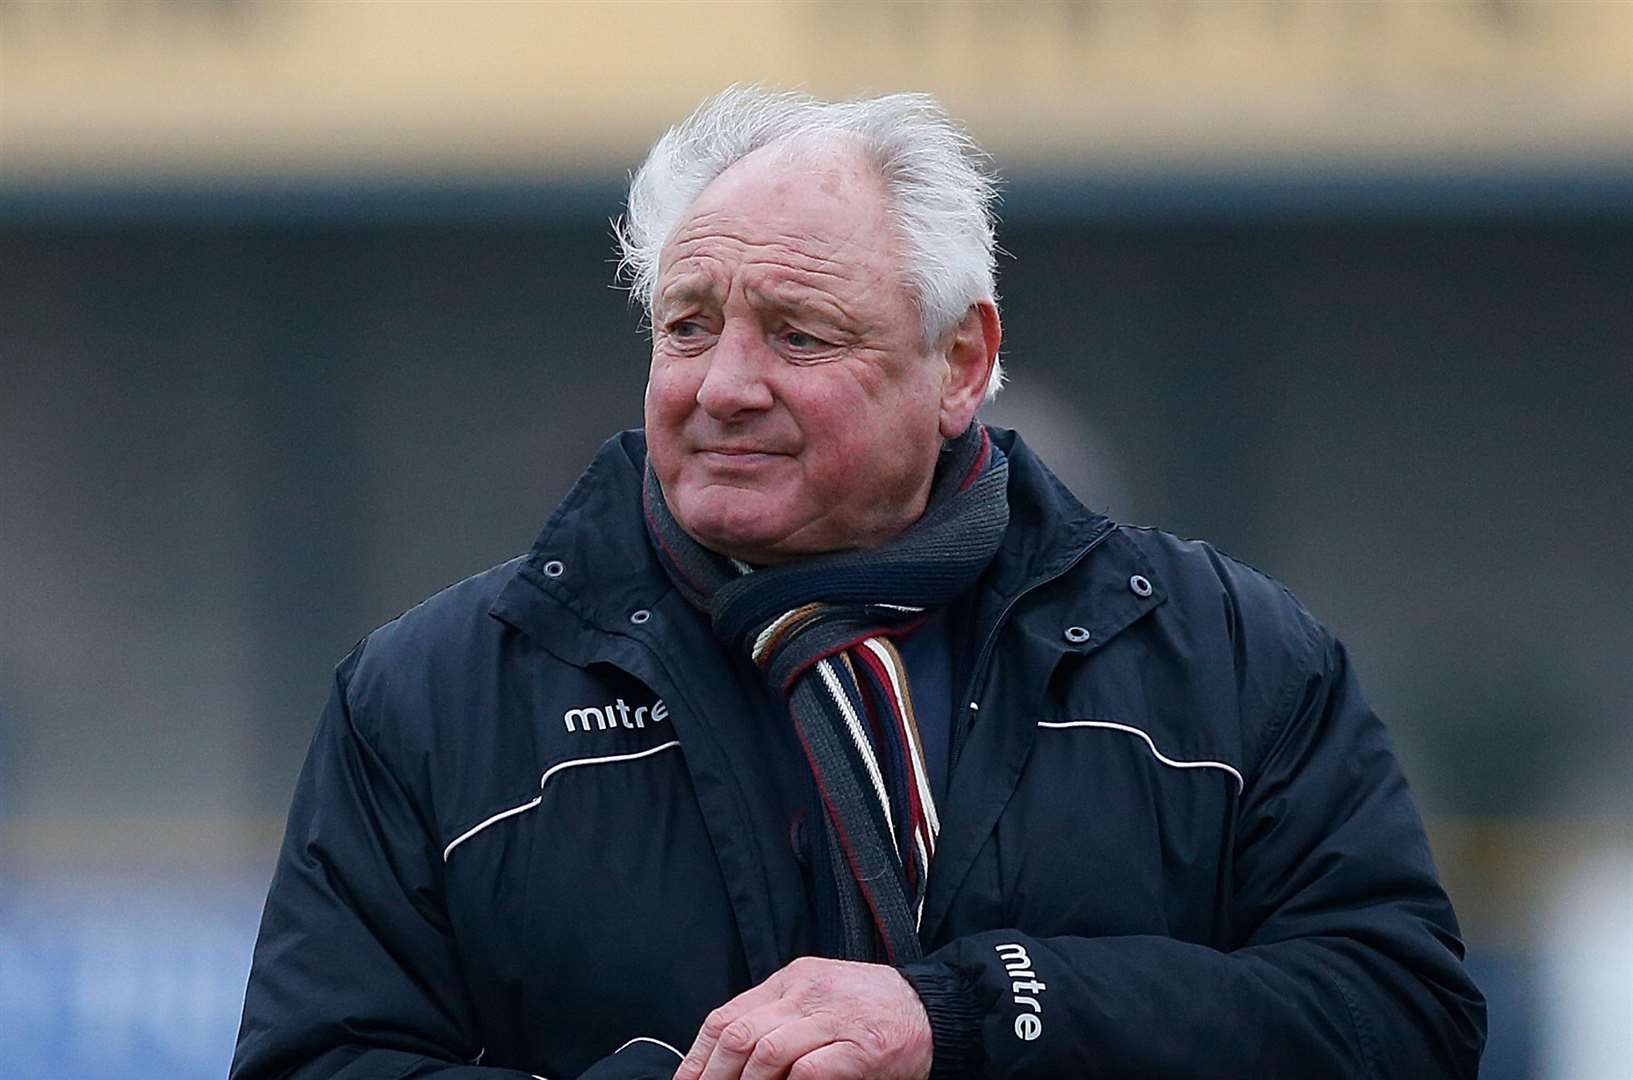 Folkestone Invicta manager Neil Cugley has chipped in to help with the club's finances